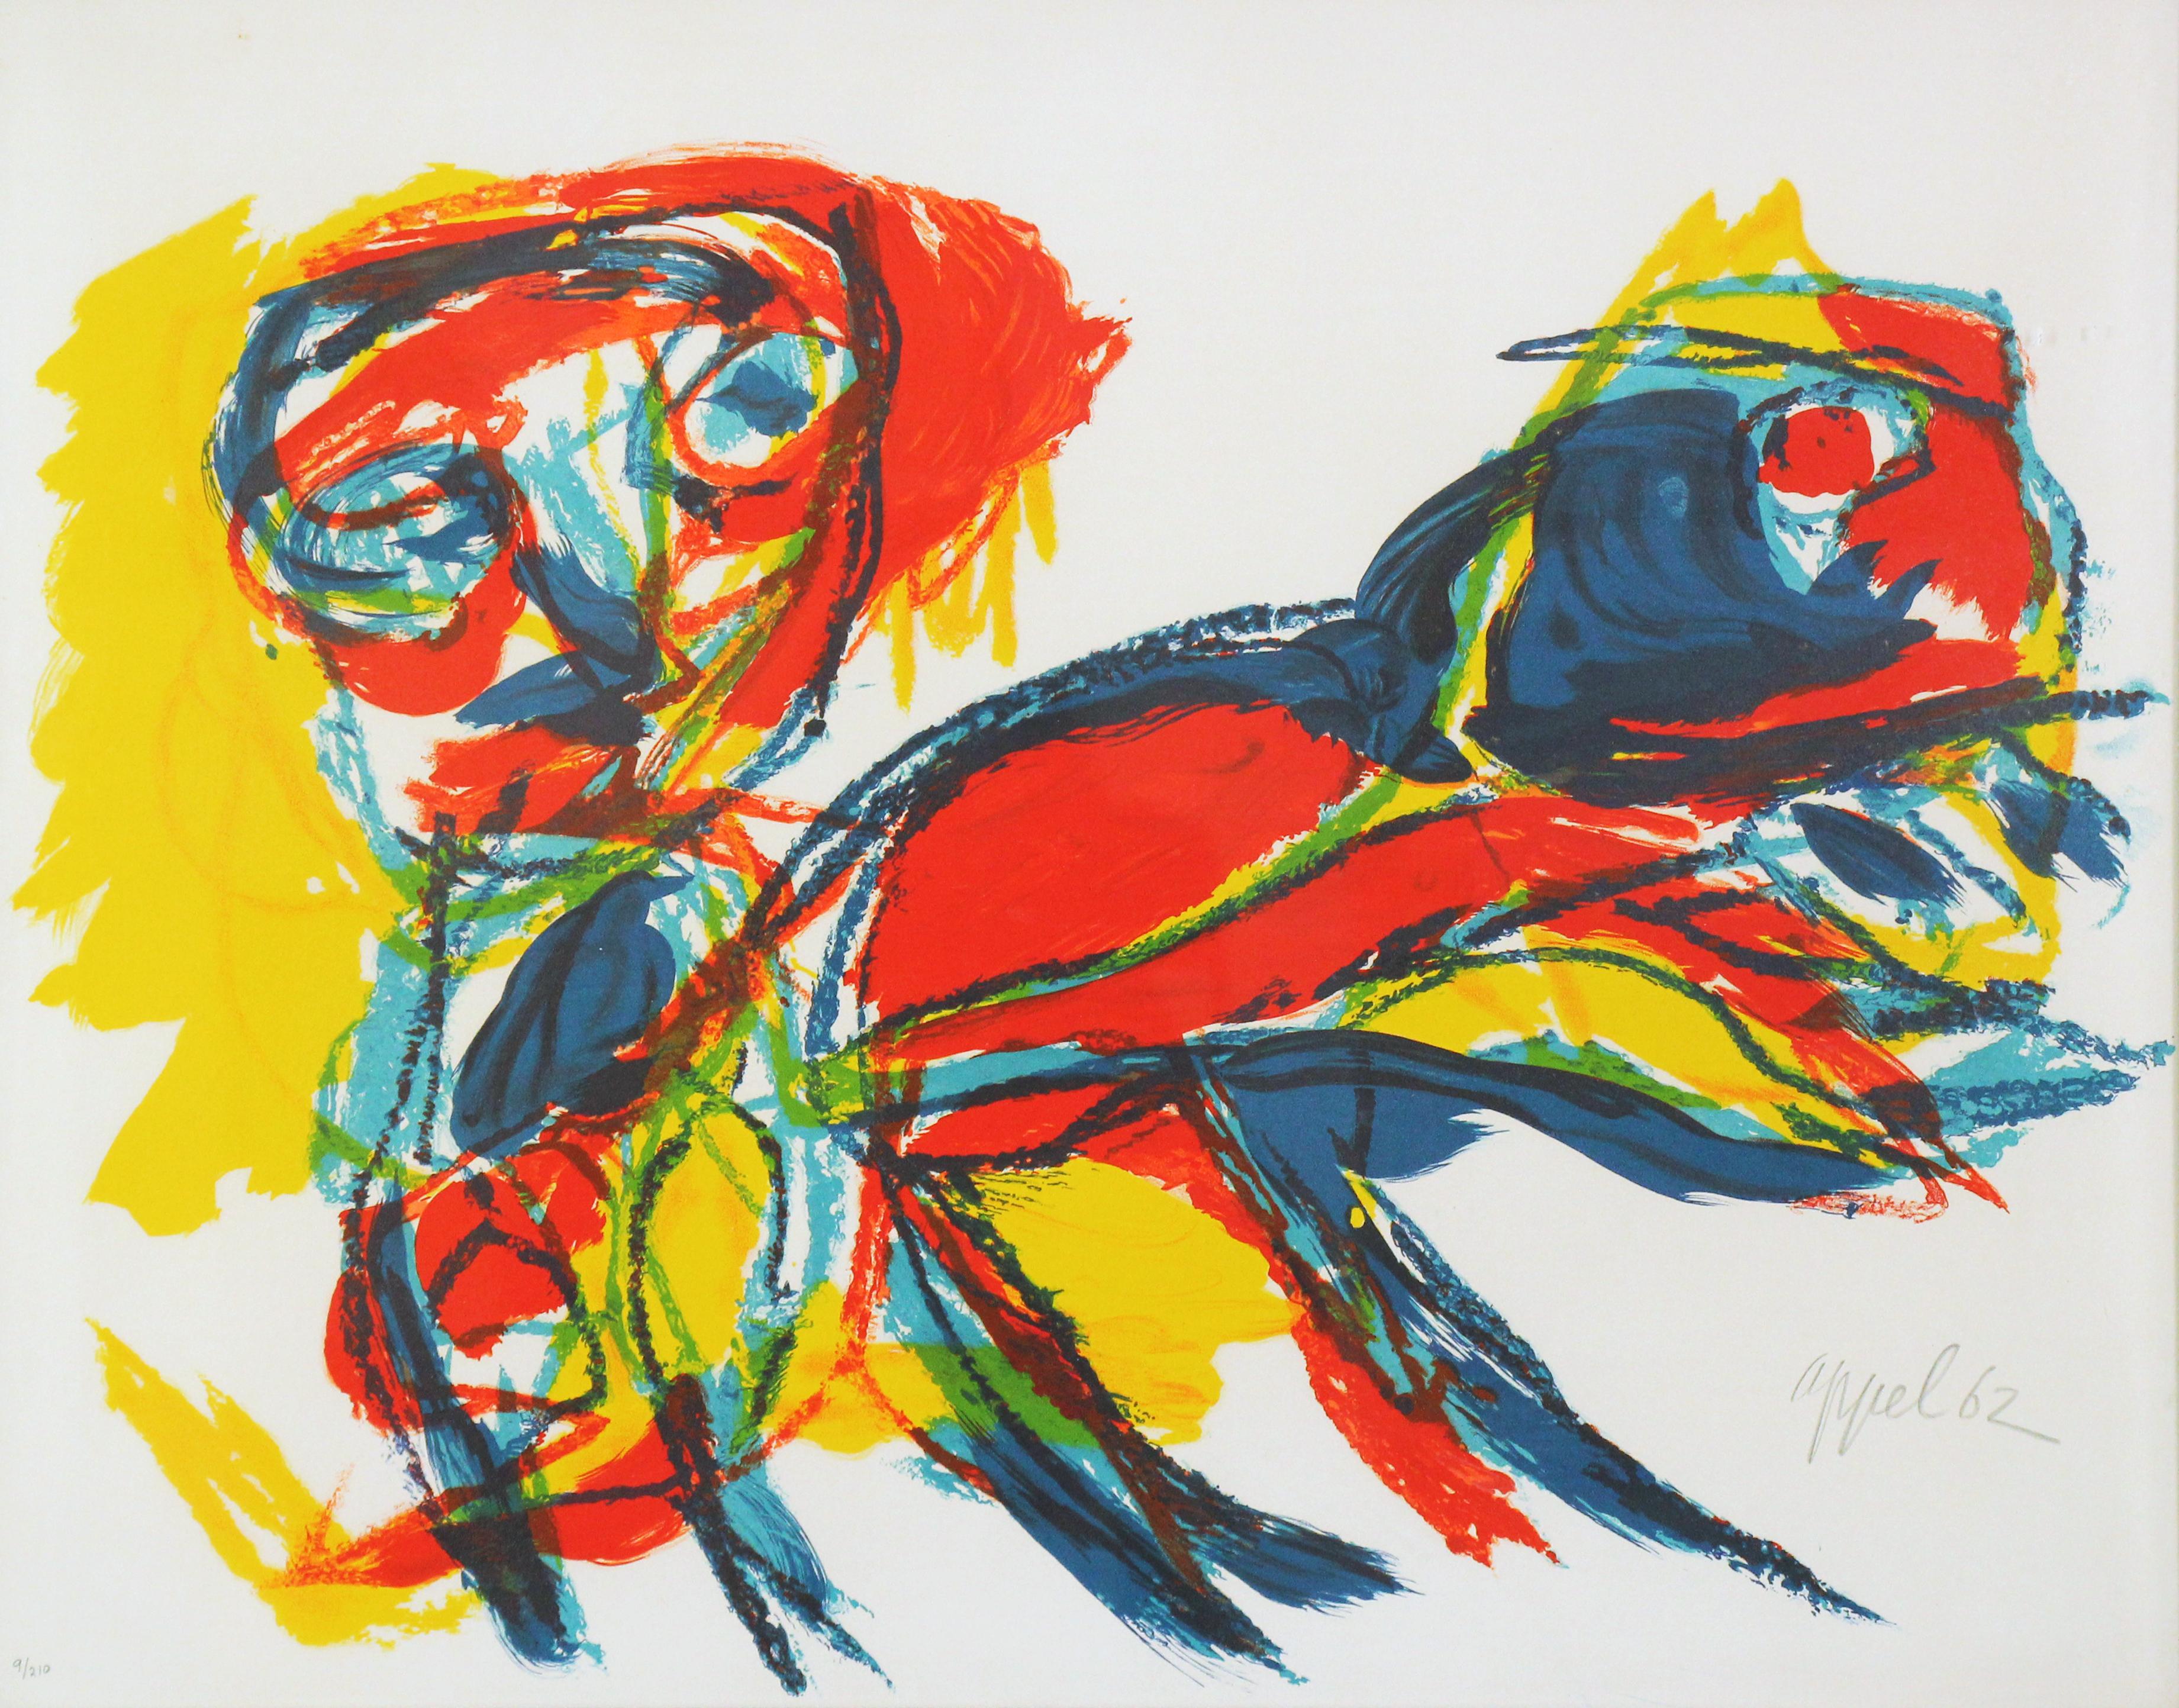 Karel Appel Figurative Print - Color Abstract of Man and Animal, Color Lithograph, 1962, Signed and Numbered